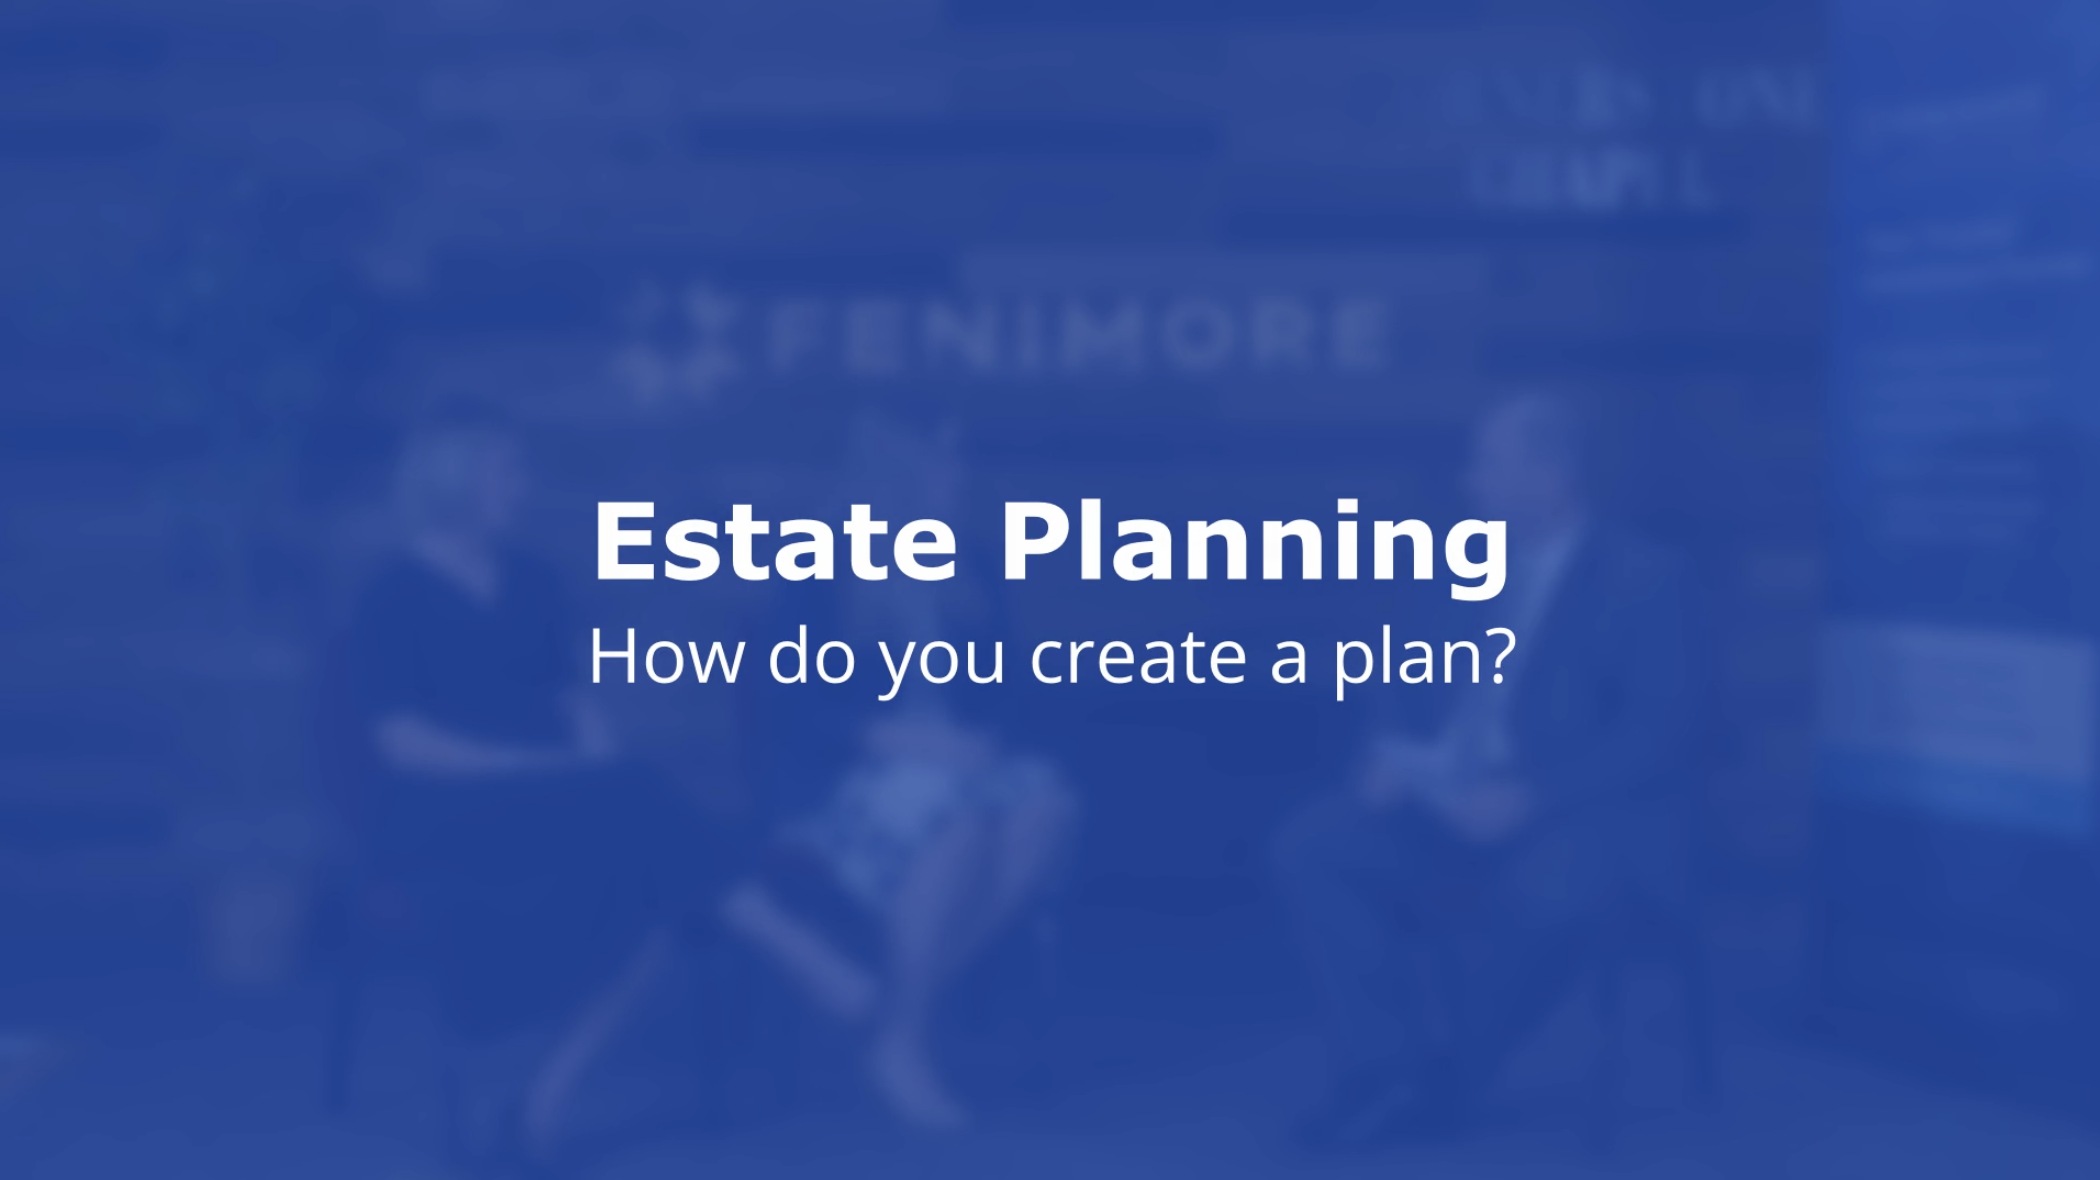 ESTATE PLANNING How do you create a plan?